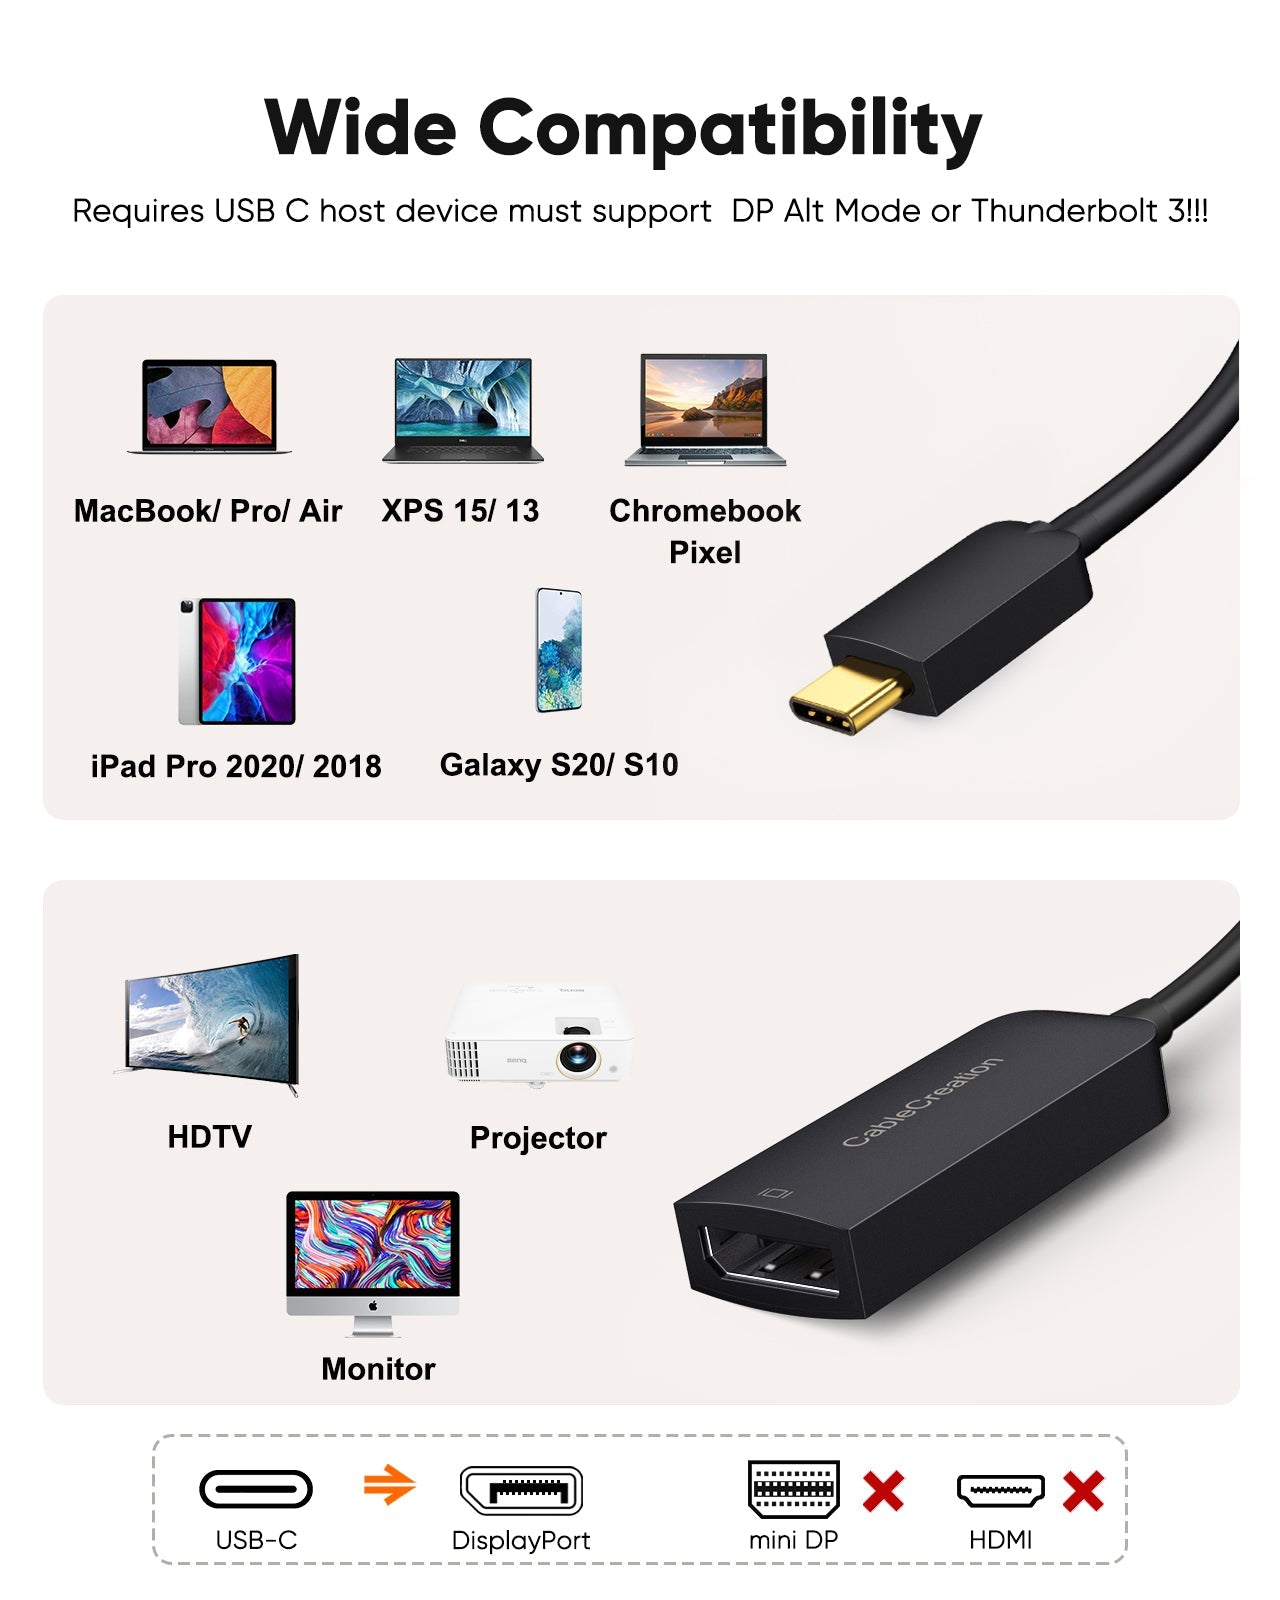 CableCreation USBC to HDMI Cable 6FT, USB Type C to HDMI 4K Cable Adapter,  Compatible with MacBook Pro 2020/2019, Mac Mini, iMac 2017, Chromebook